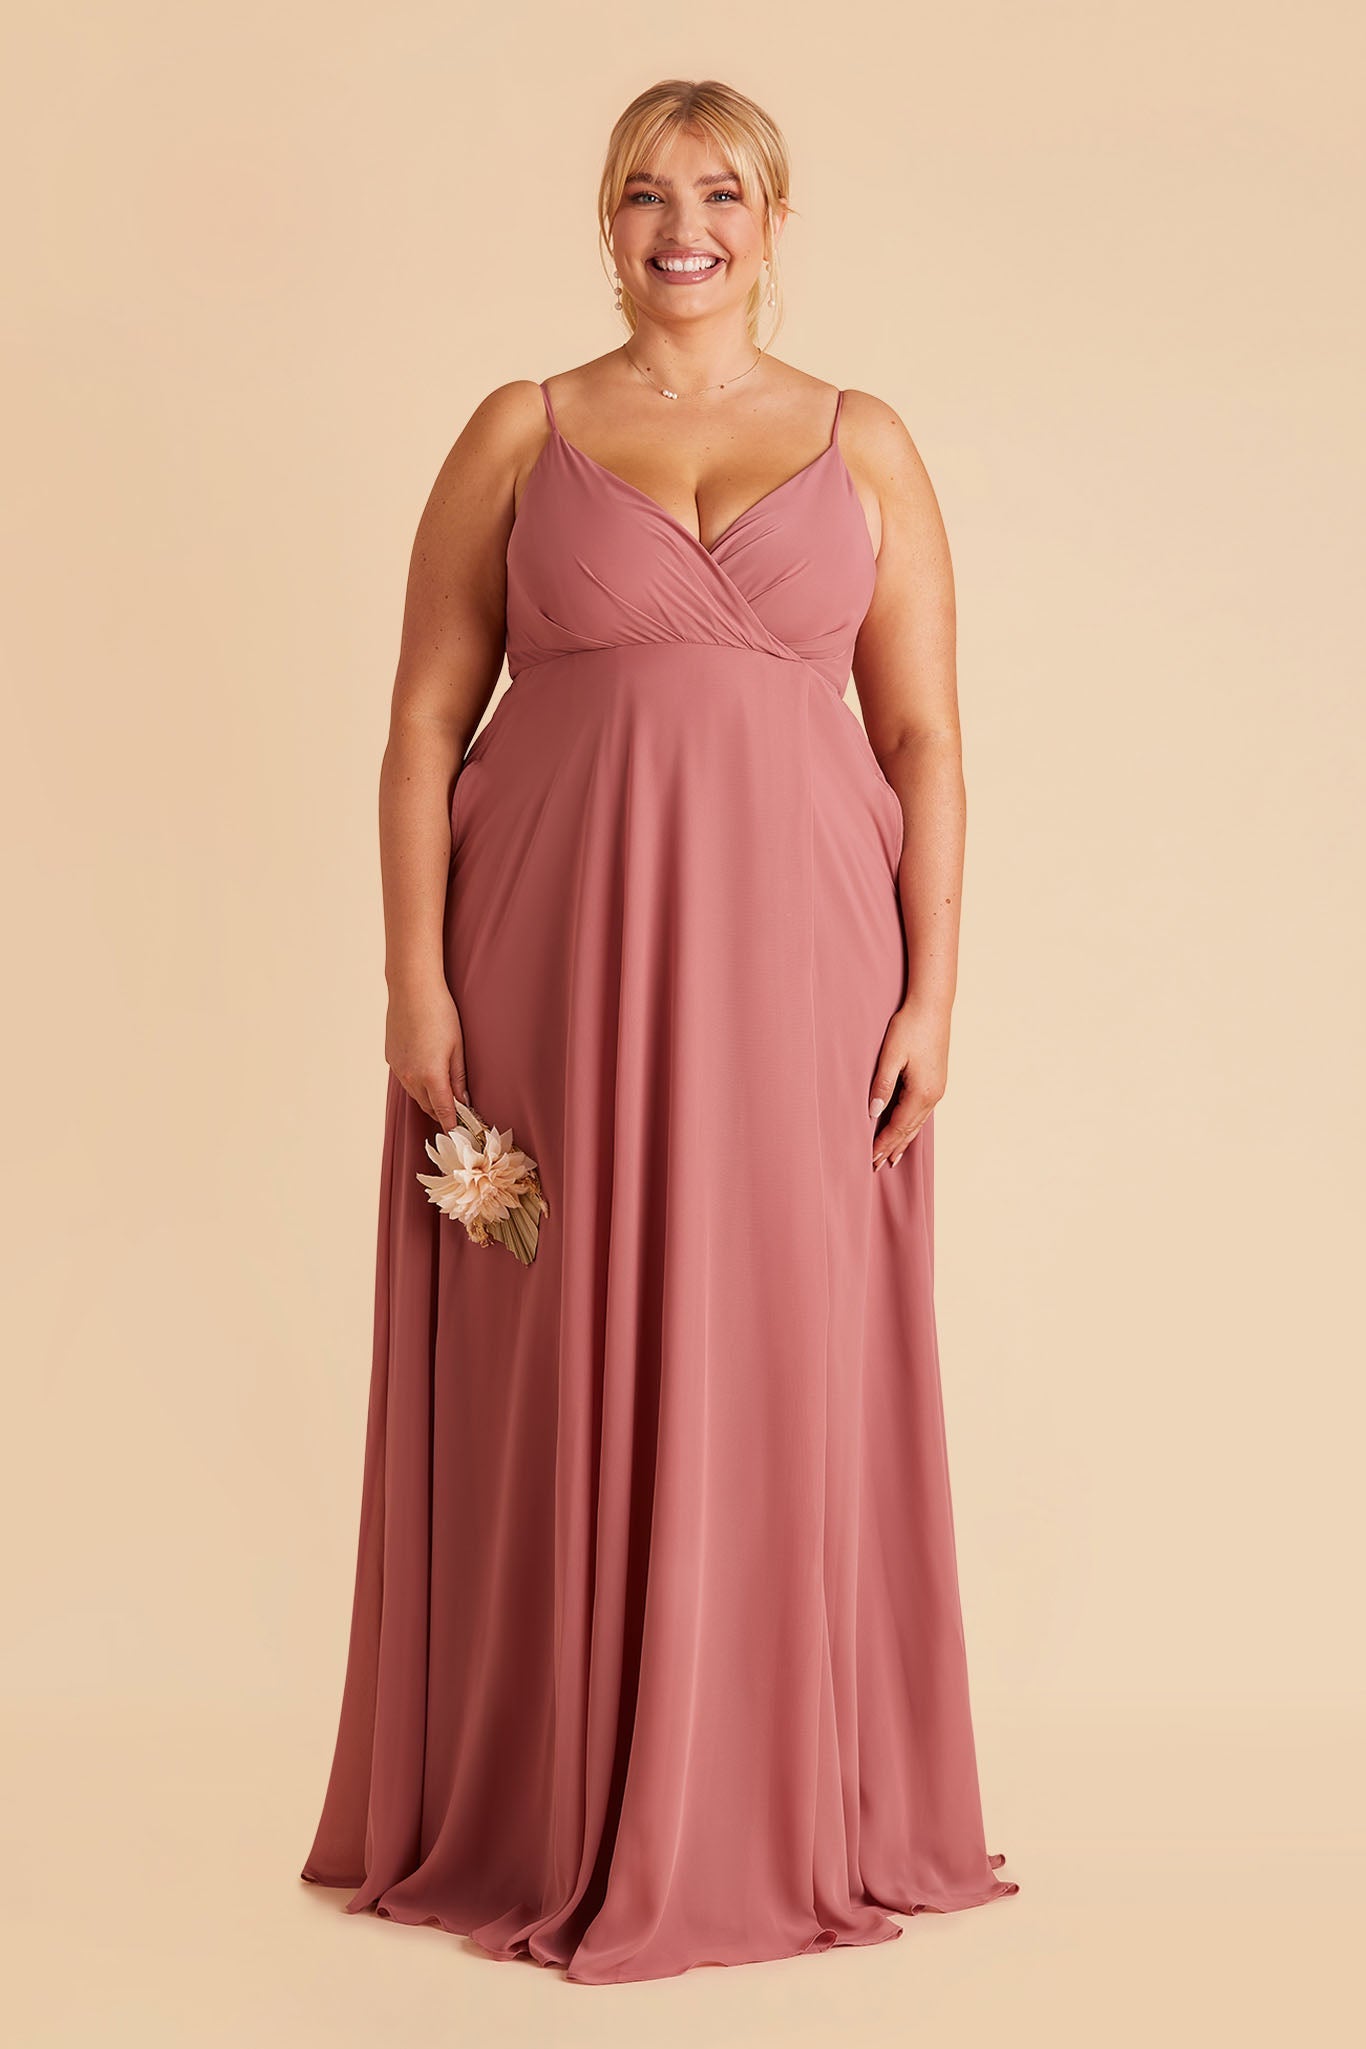 Kaia plus size bridesmaids dress in mulberry chiffon by Birdy Grey, front view